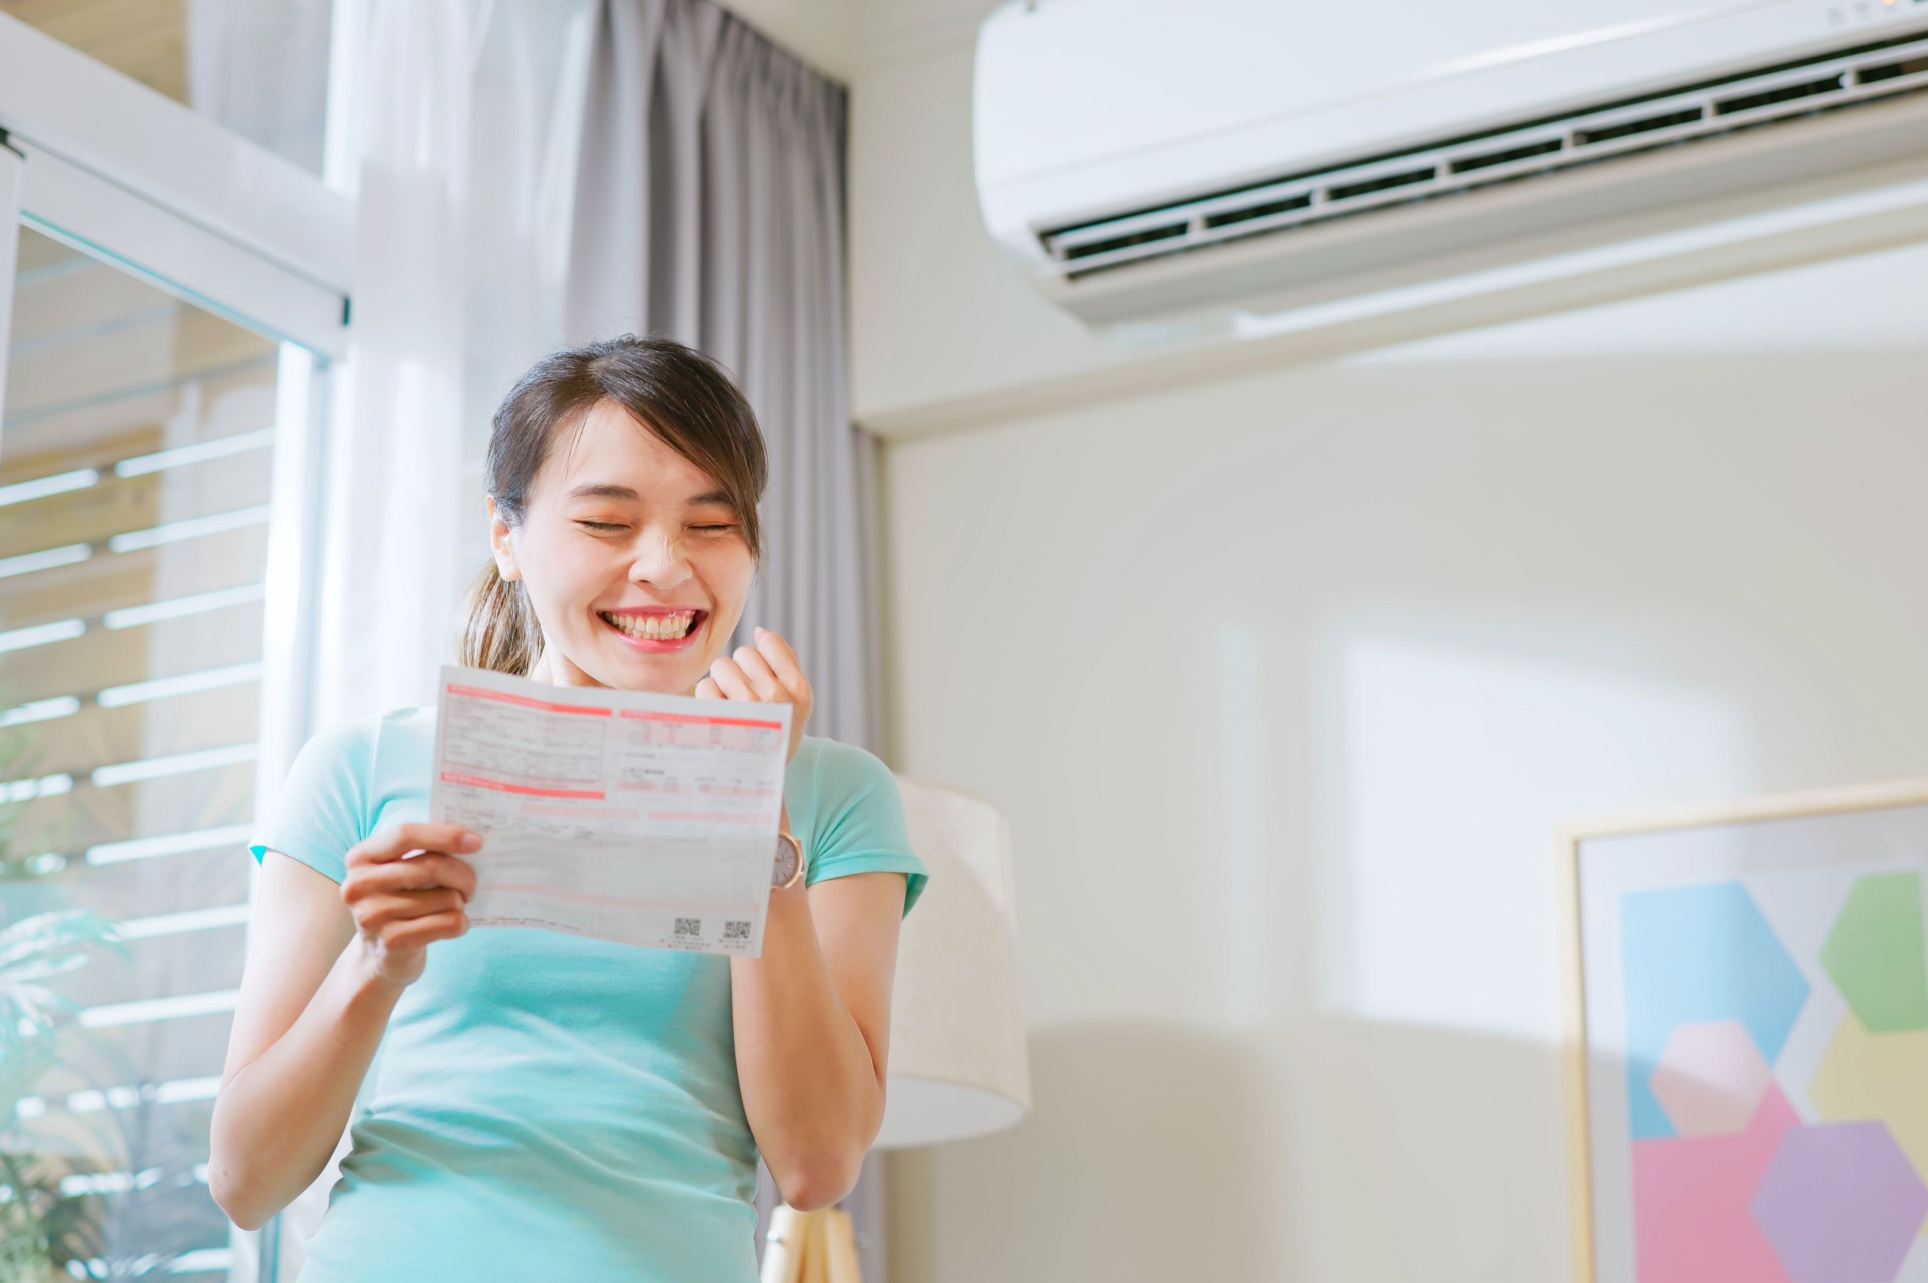 Financing Strategies to Afford a New AC Unit | AC Repair and Installation in St. Louis | HVAC Services Near Me